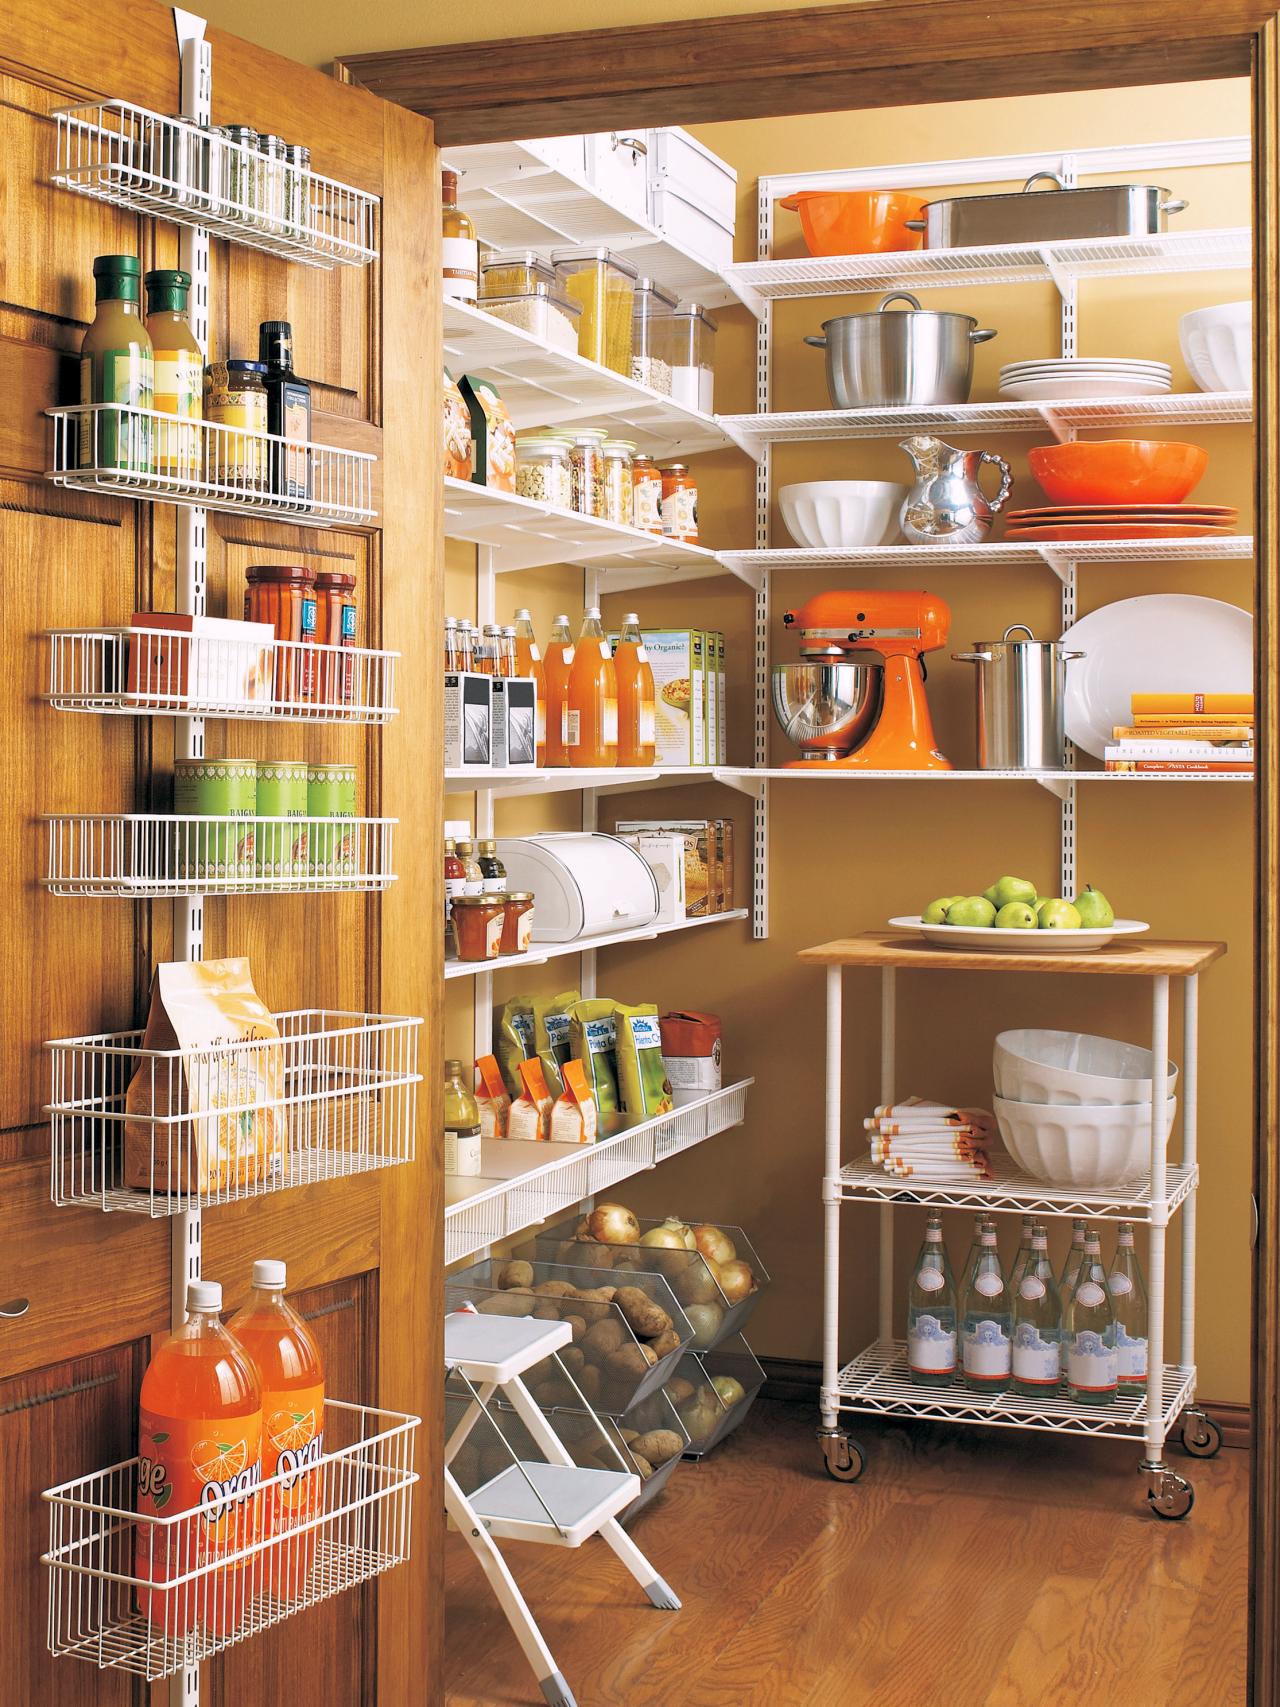 Don't let door space go to waste. Attach hanging shelves for extra storage.